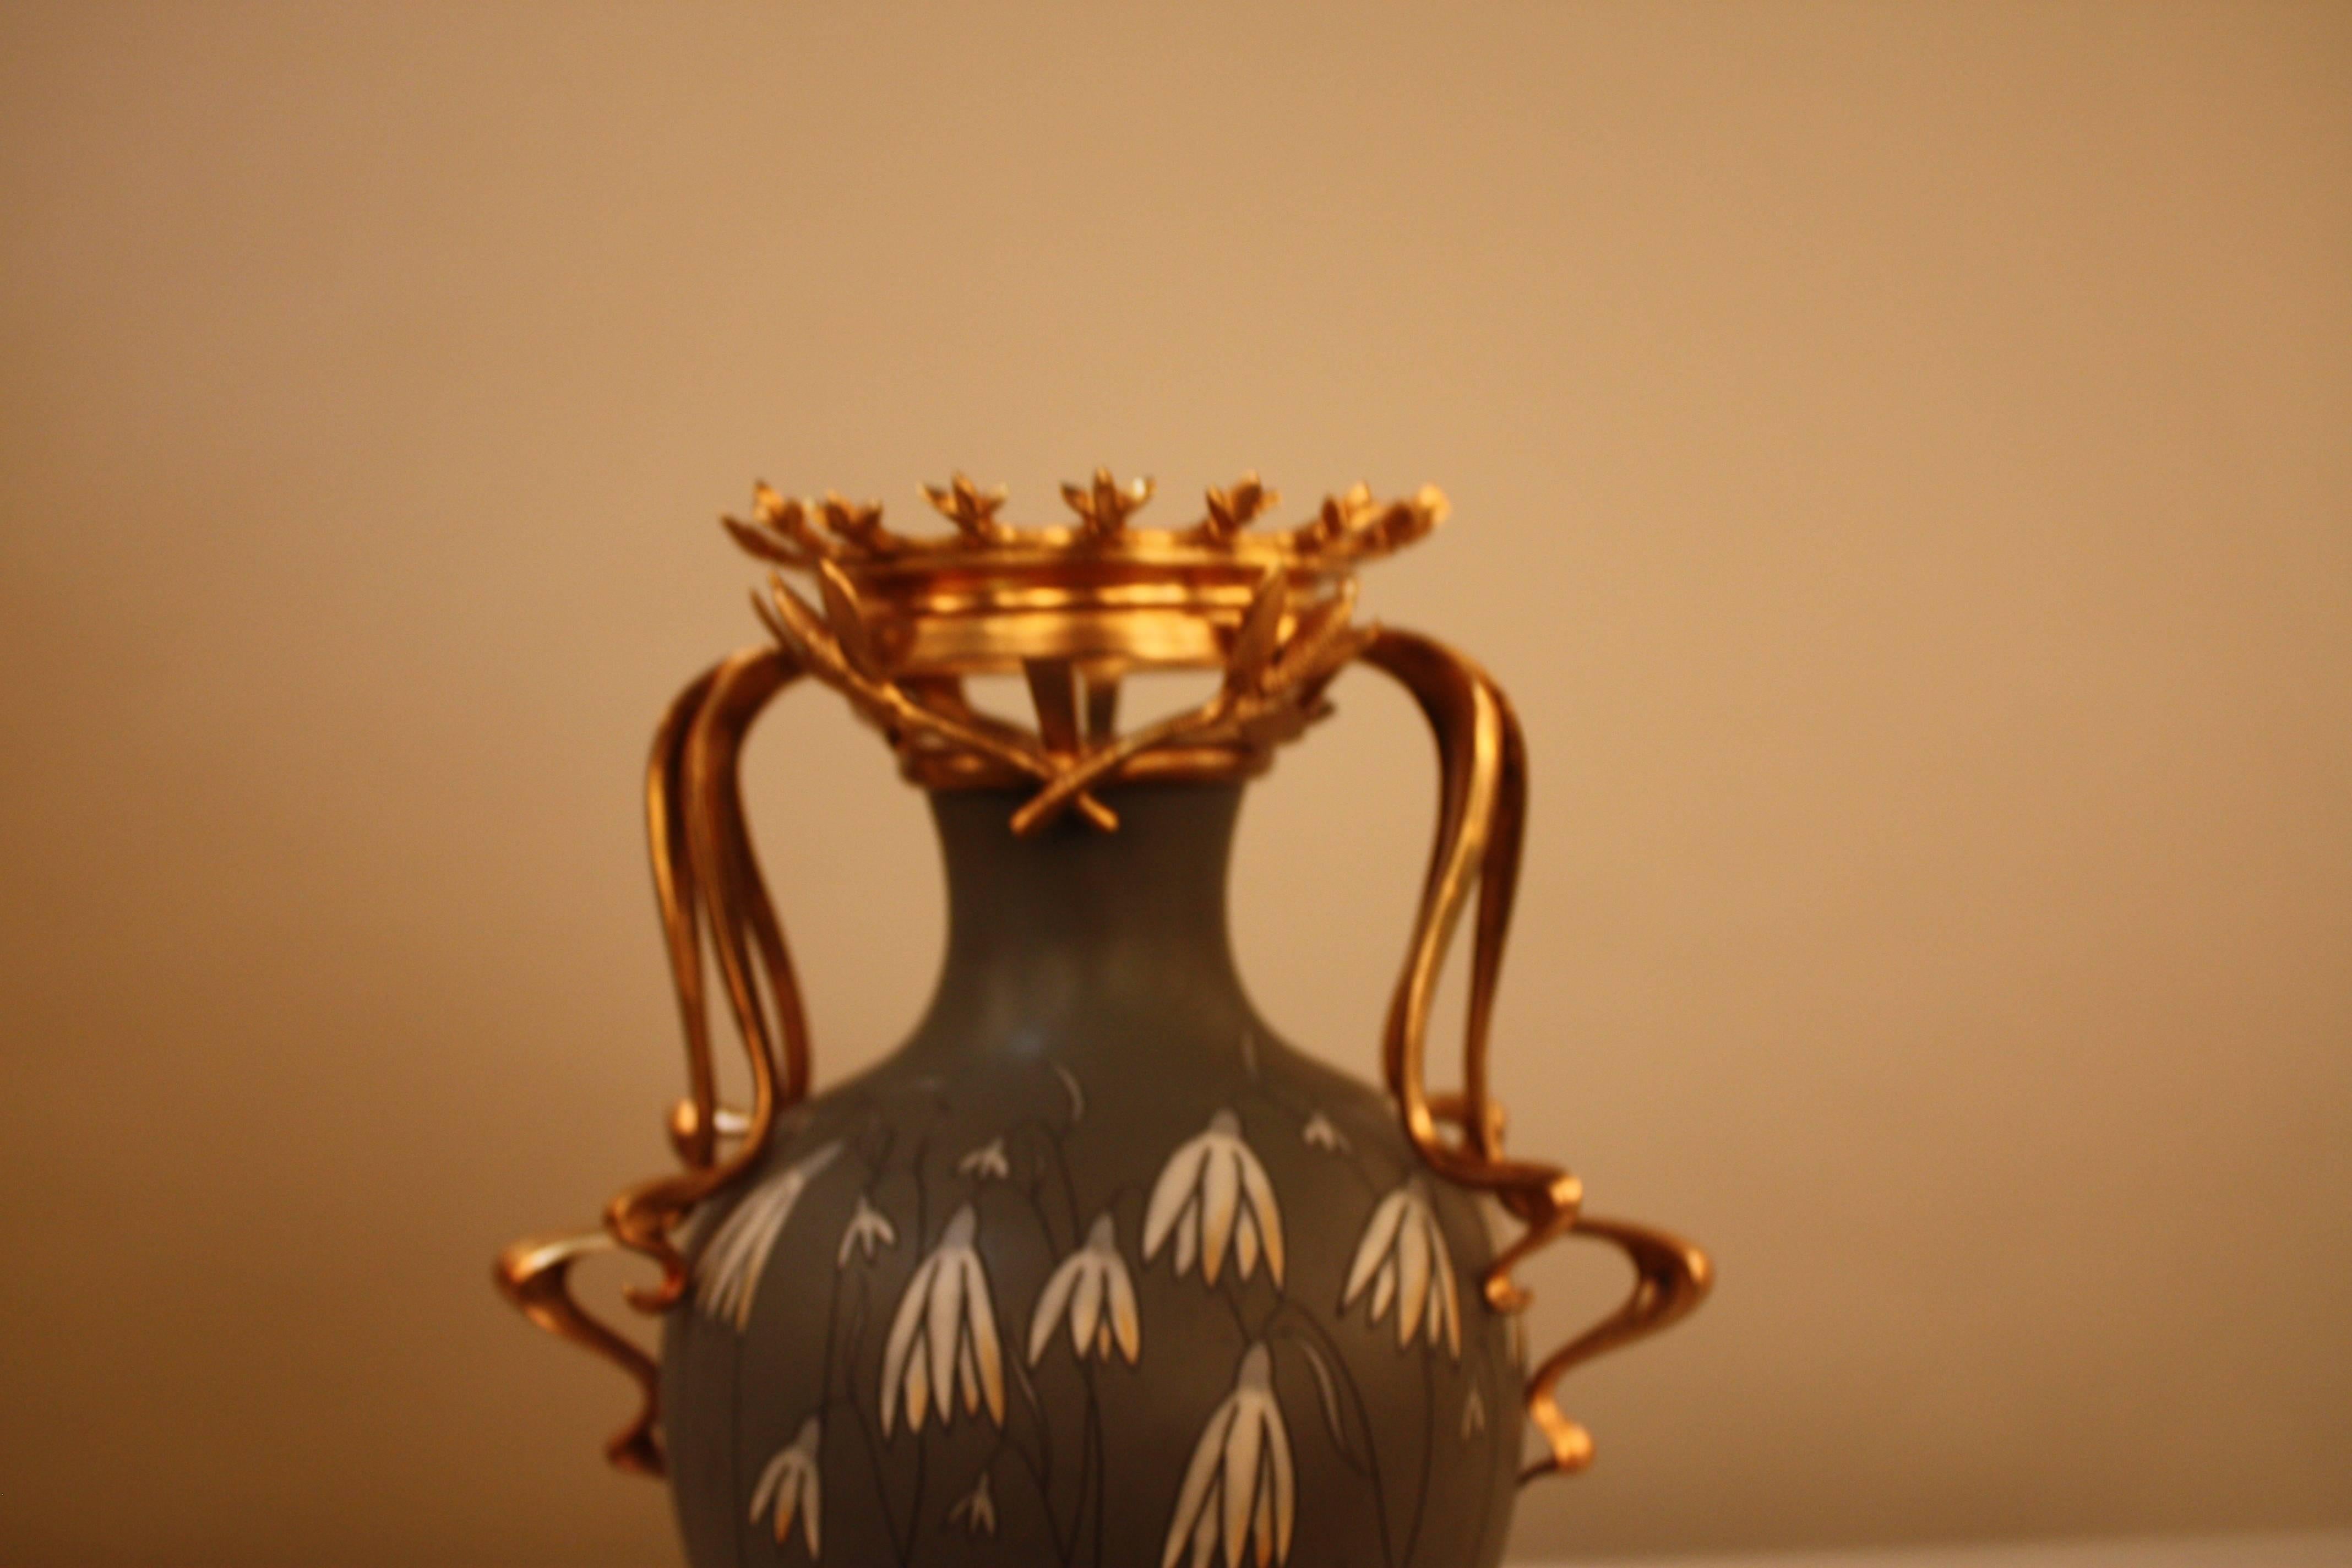 This beautiful urn was crafted in Germany near the turn of the last century. Art Nouveau styled piece, it is decorated with a bronze doré base and handles.